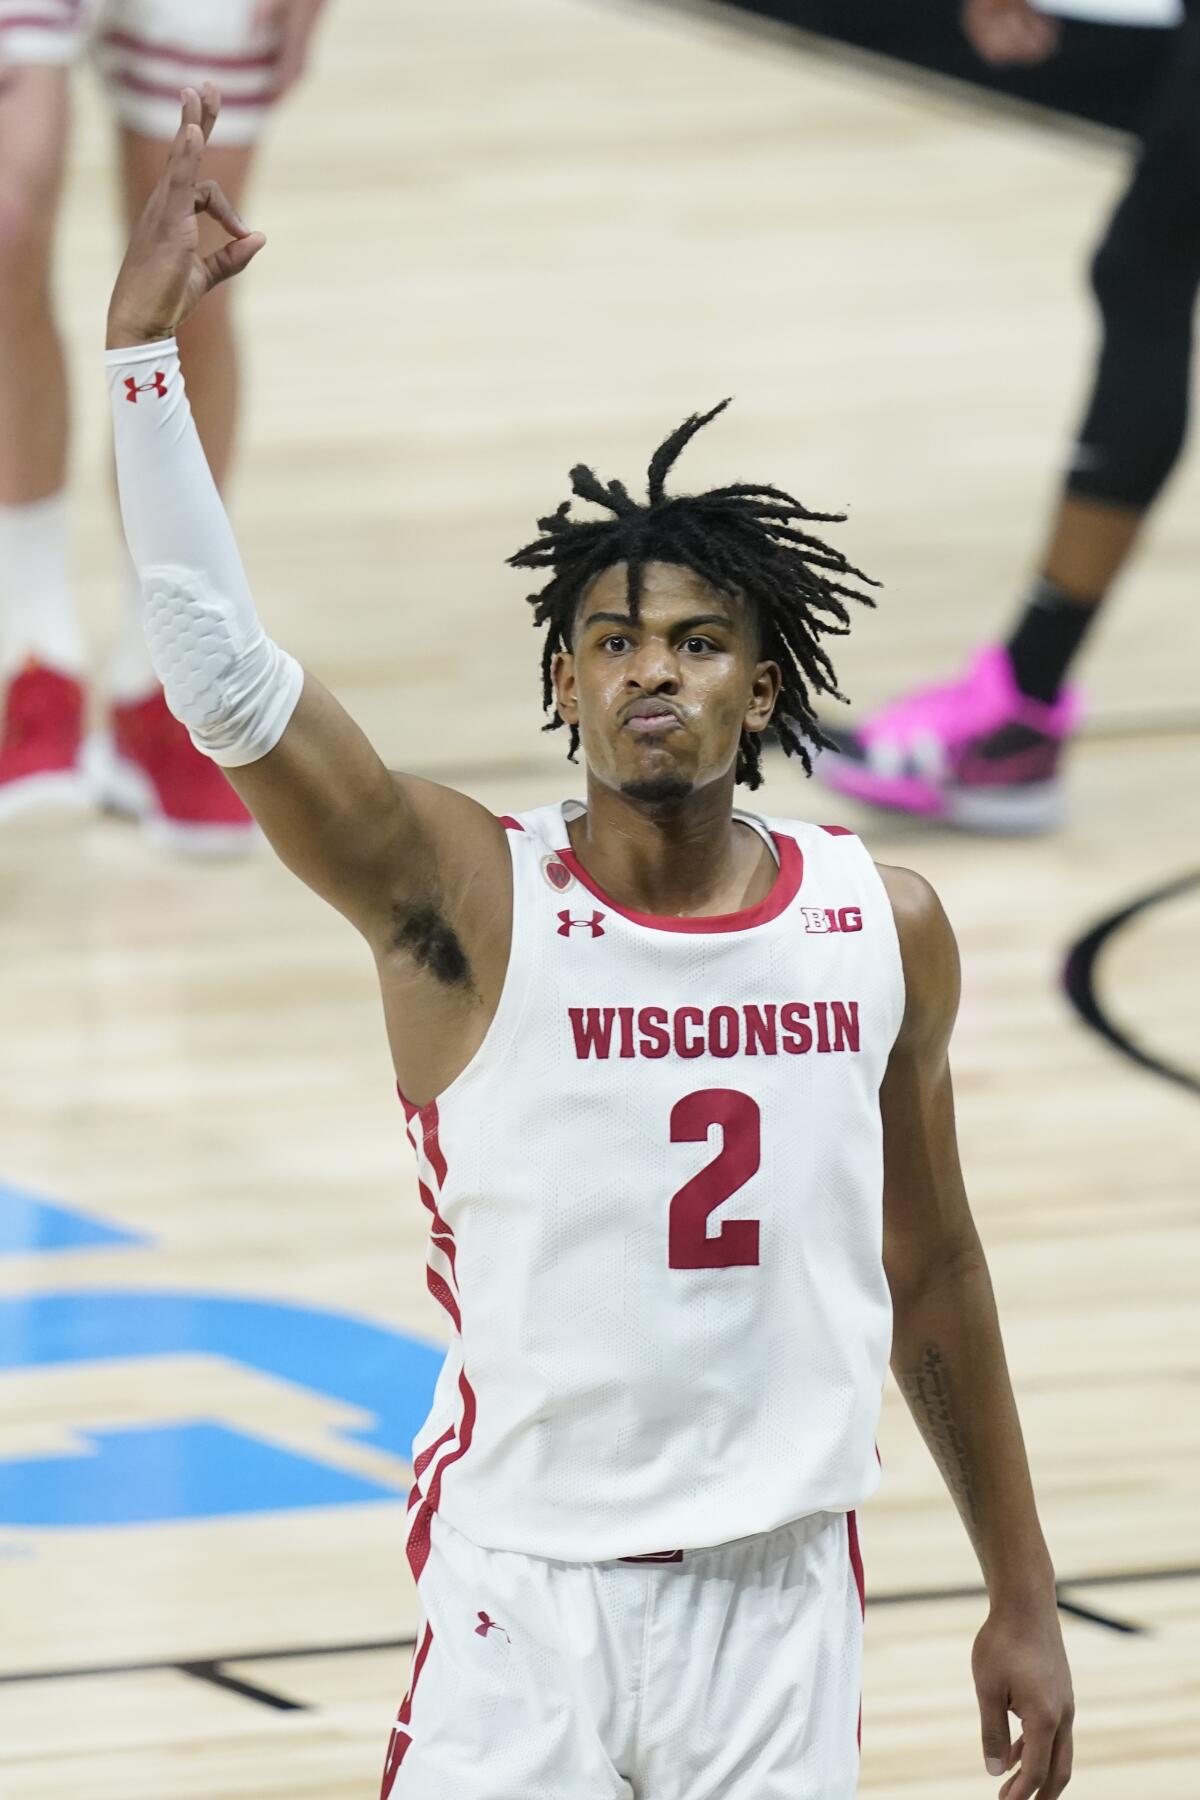 Wisconsin's Aleem Ford reacts after hitting a shot as time expired to end the first half of an NCAA college basketball game against Penn State at the Big Ten Conference tournament, Thursday, March 11, 2021, in Indianapolis. (AP Photo/Darron Cummings)